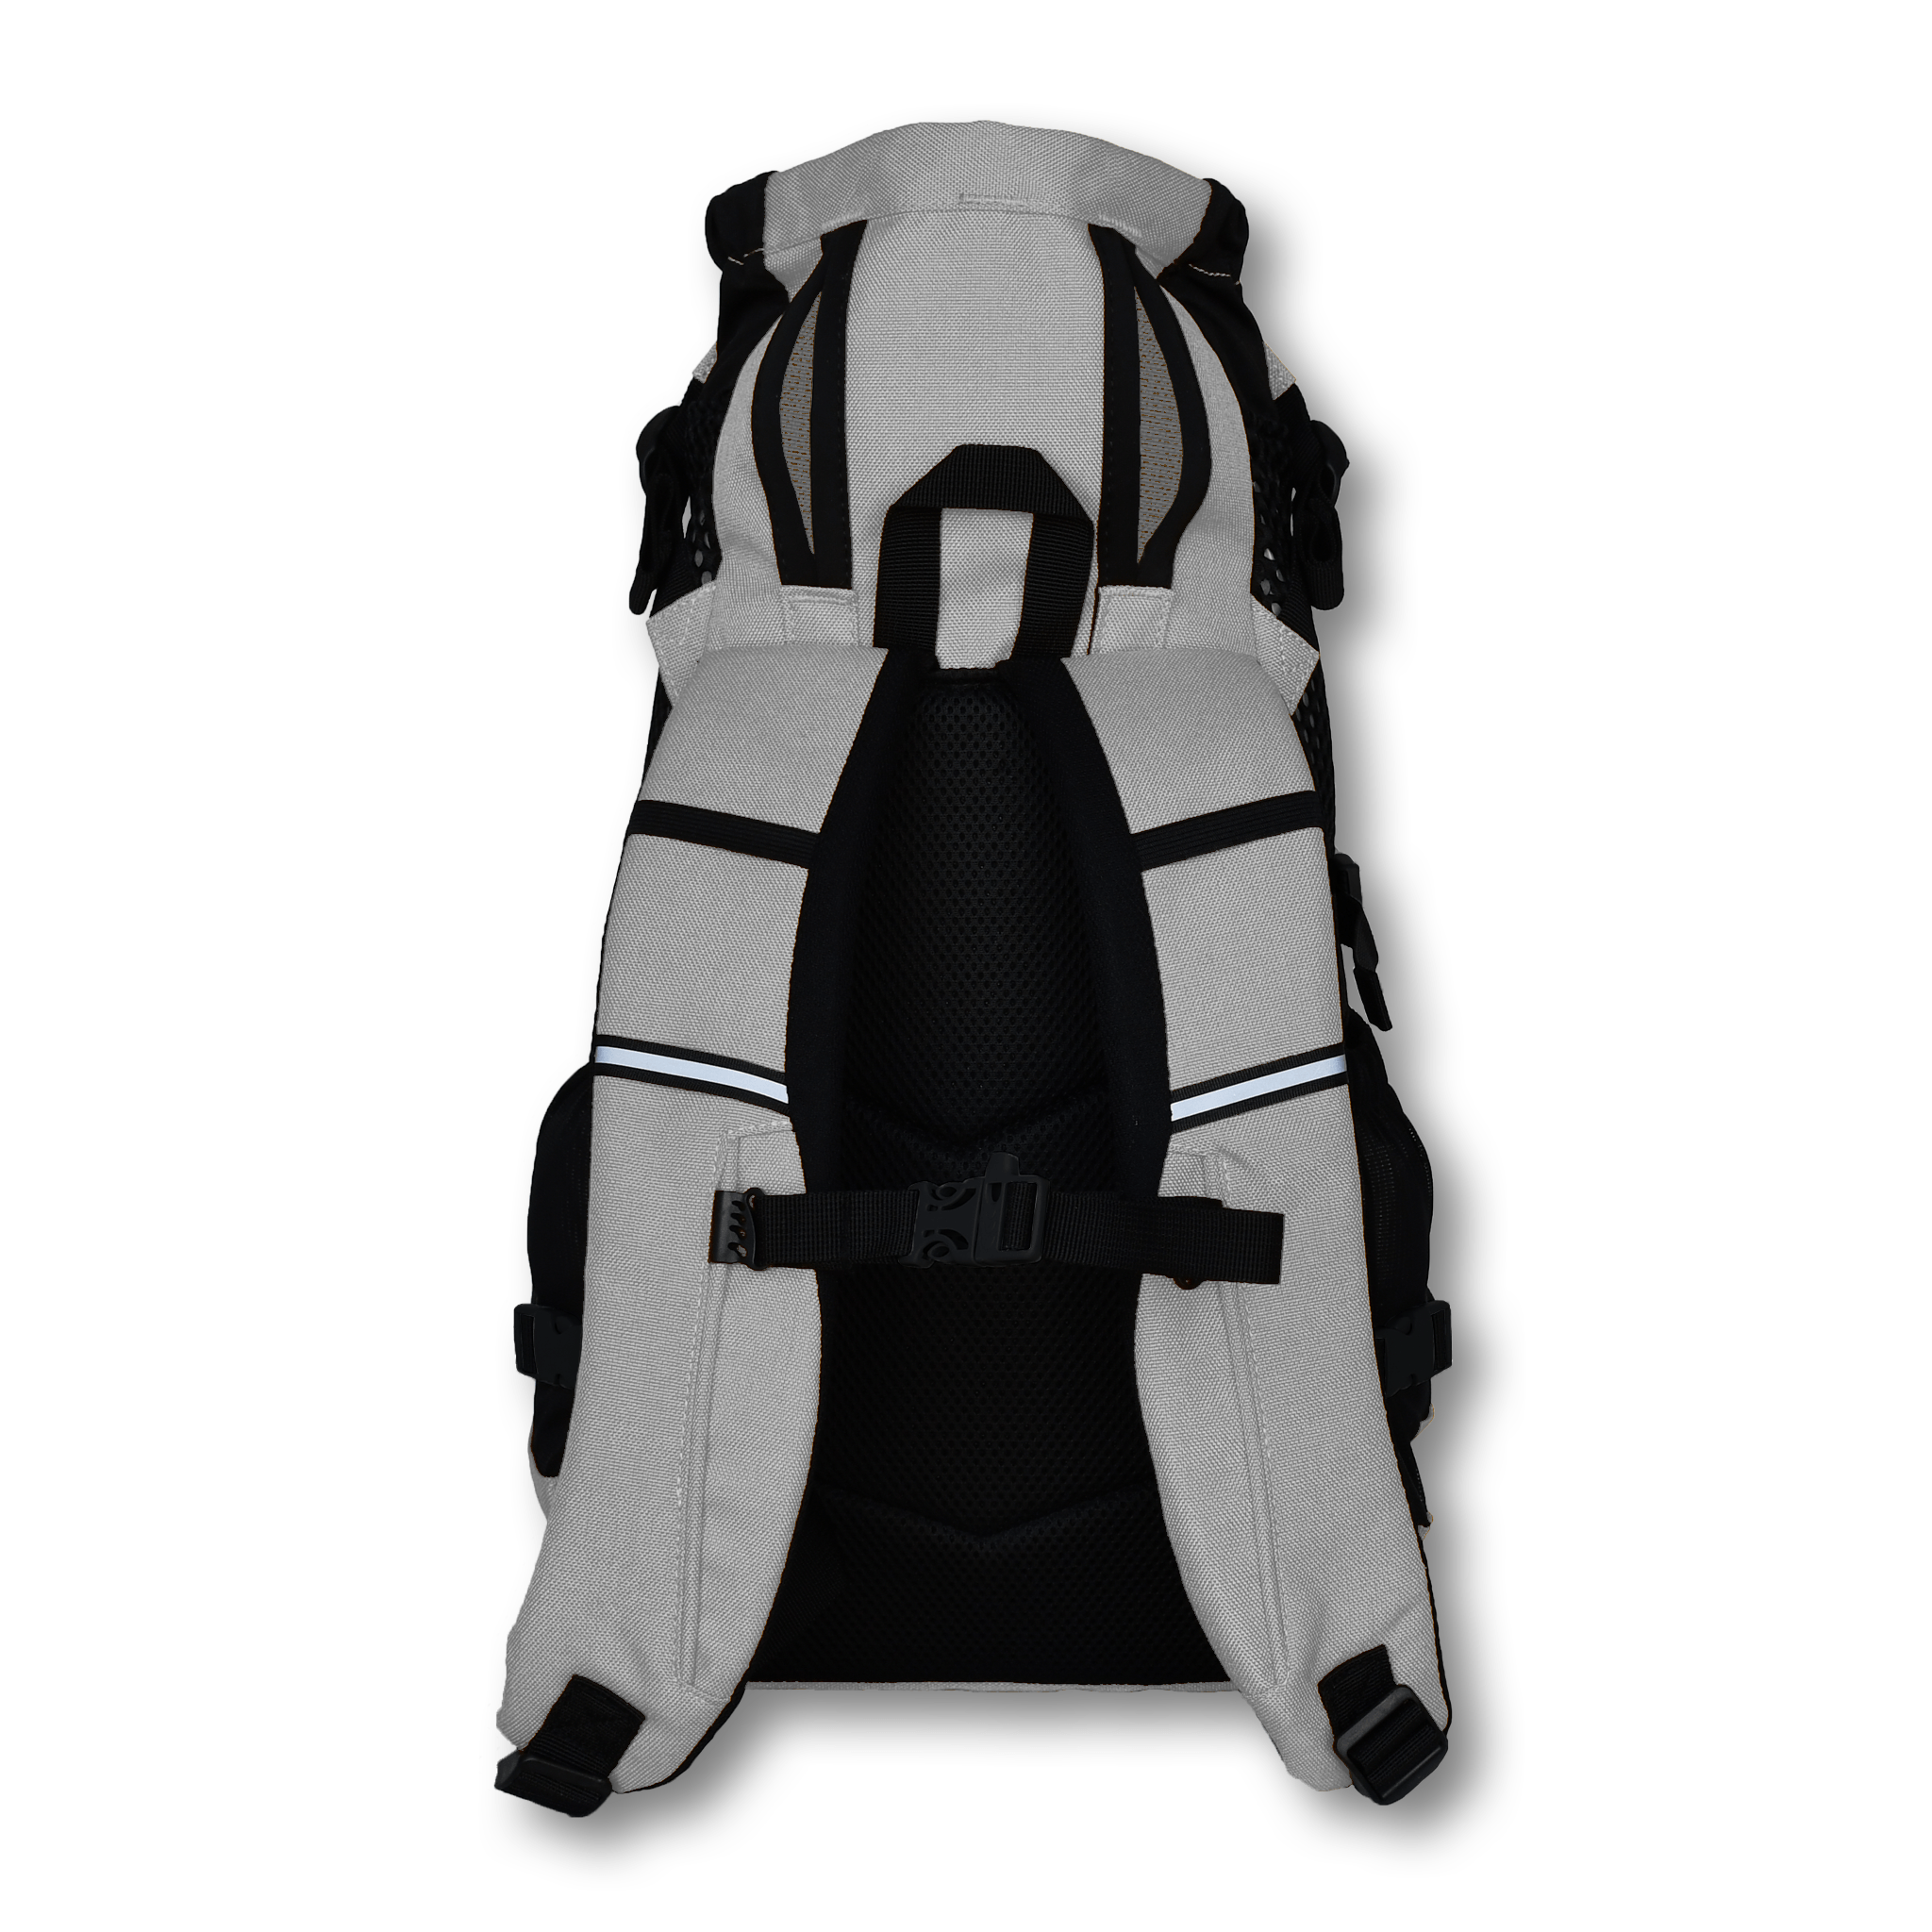 Plus 2 dog carrier gray Straps